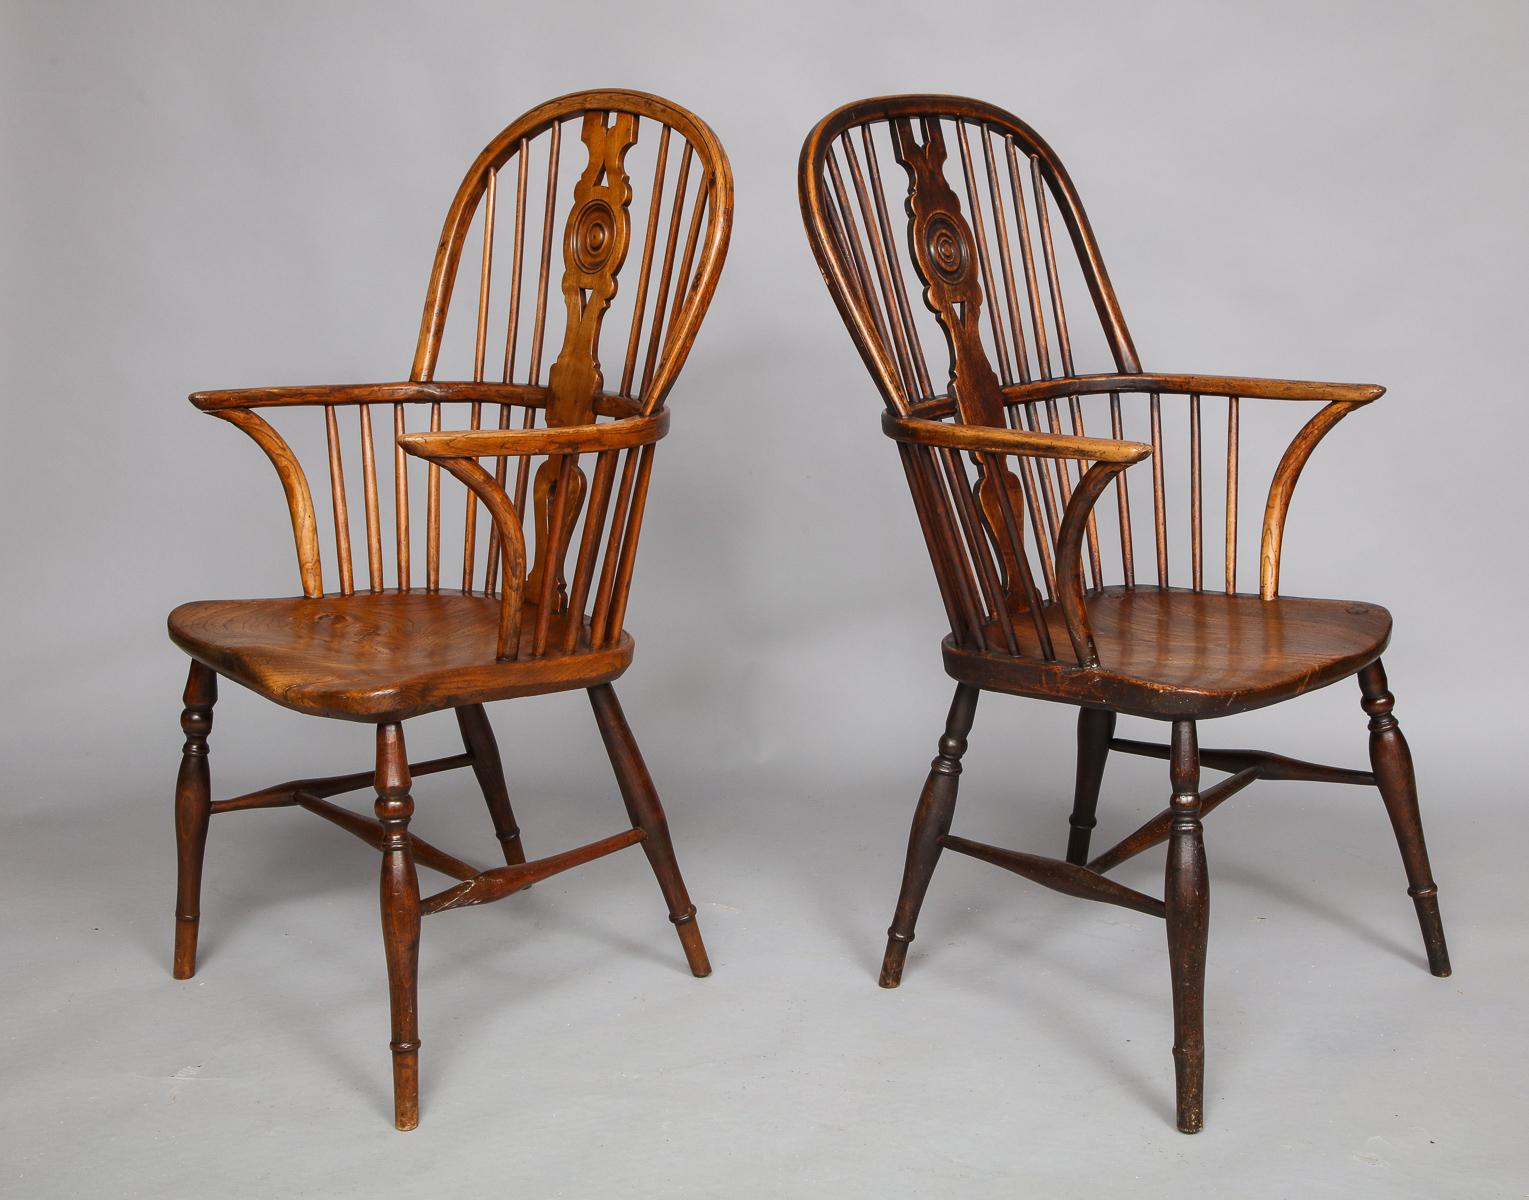 Country Near Pair of English Hoop Back Windsor Armchairs